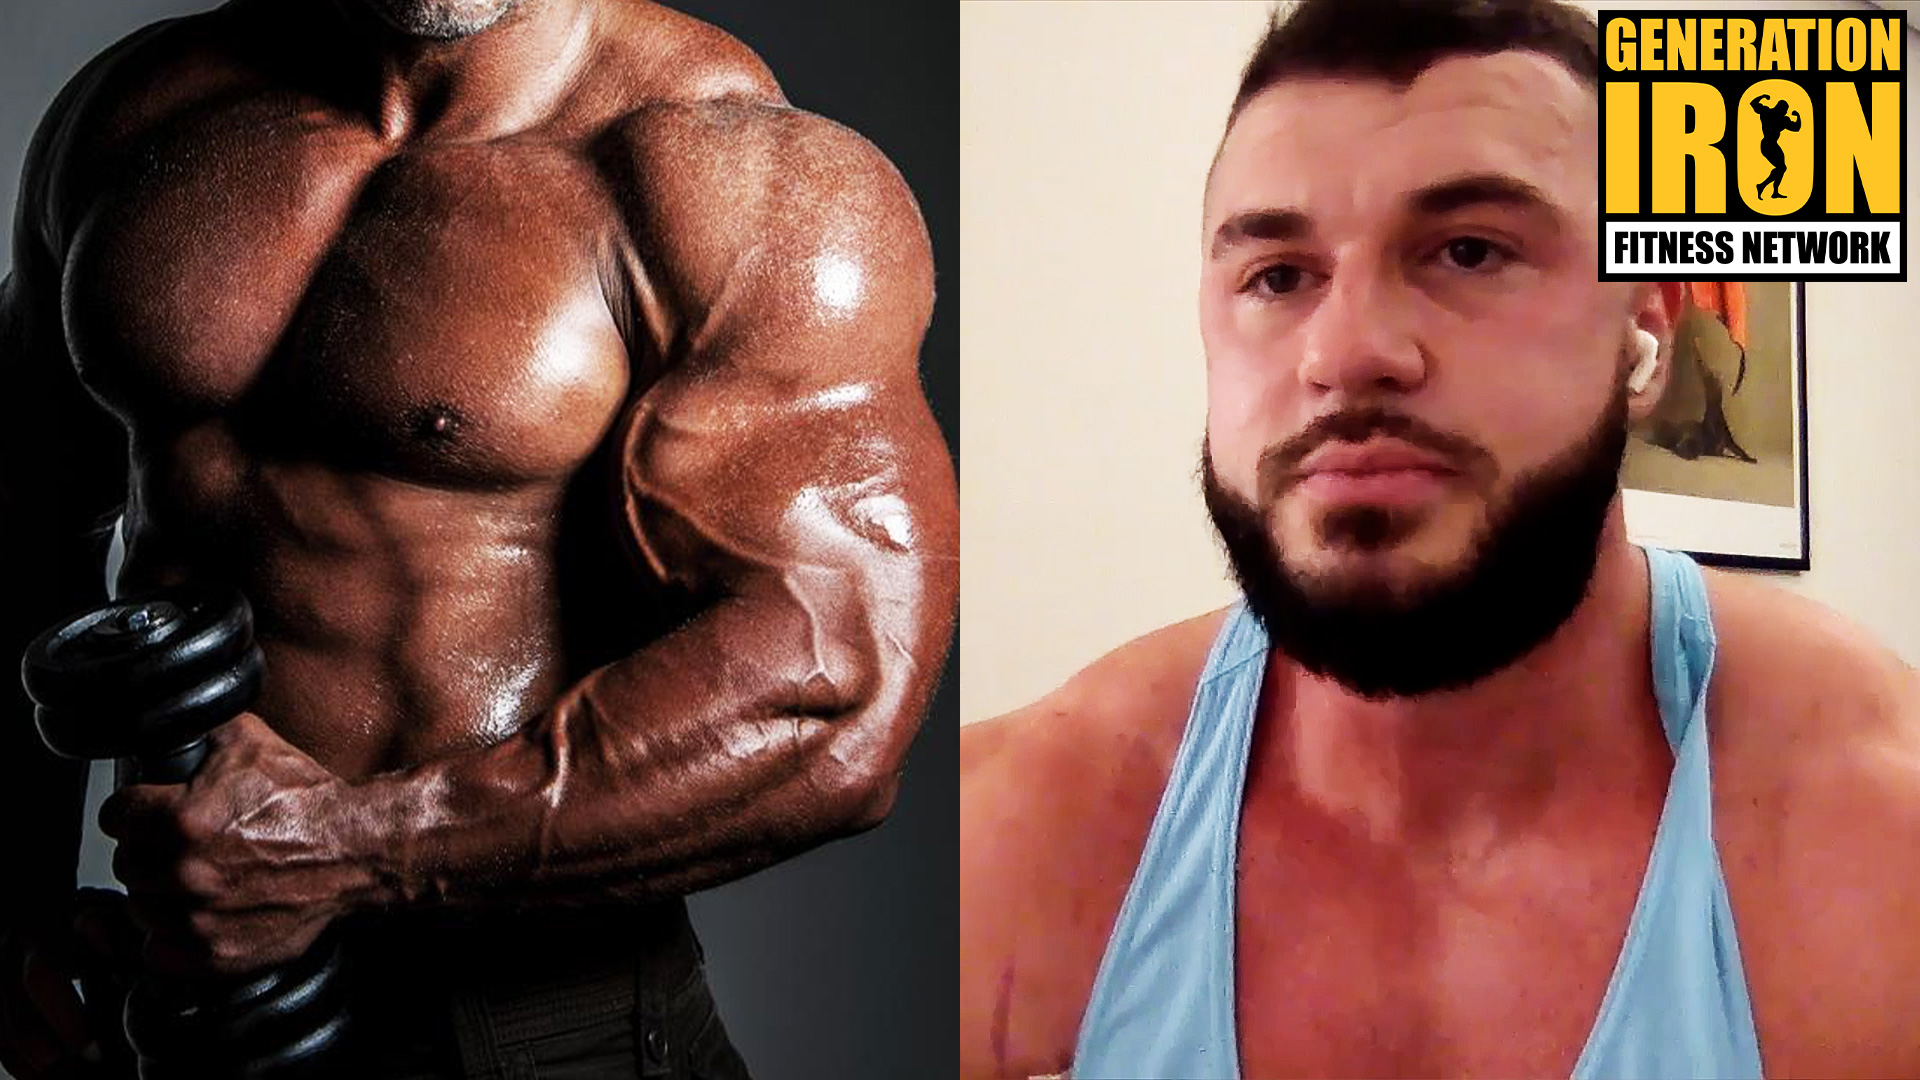 Ryan Crowley: The Pros and Cons Of Being An Endomorph Bodybuilder